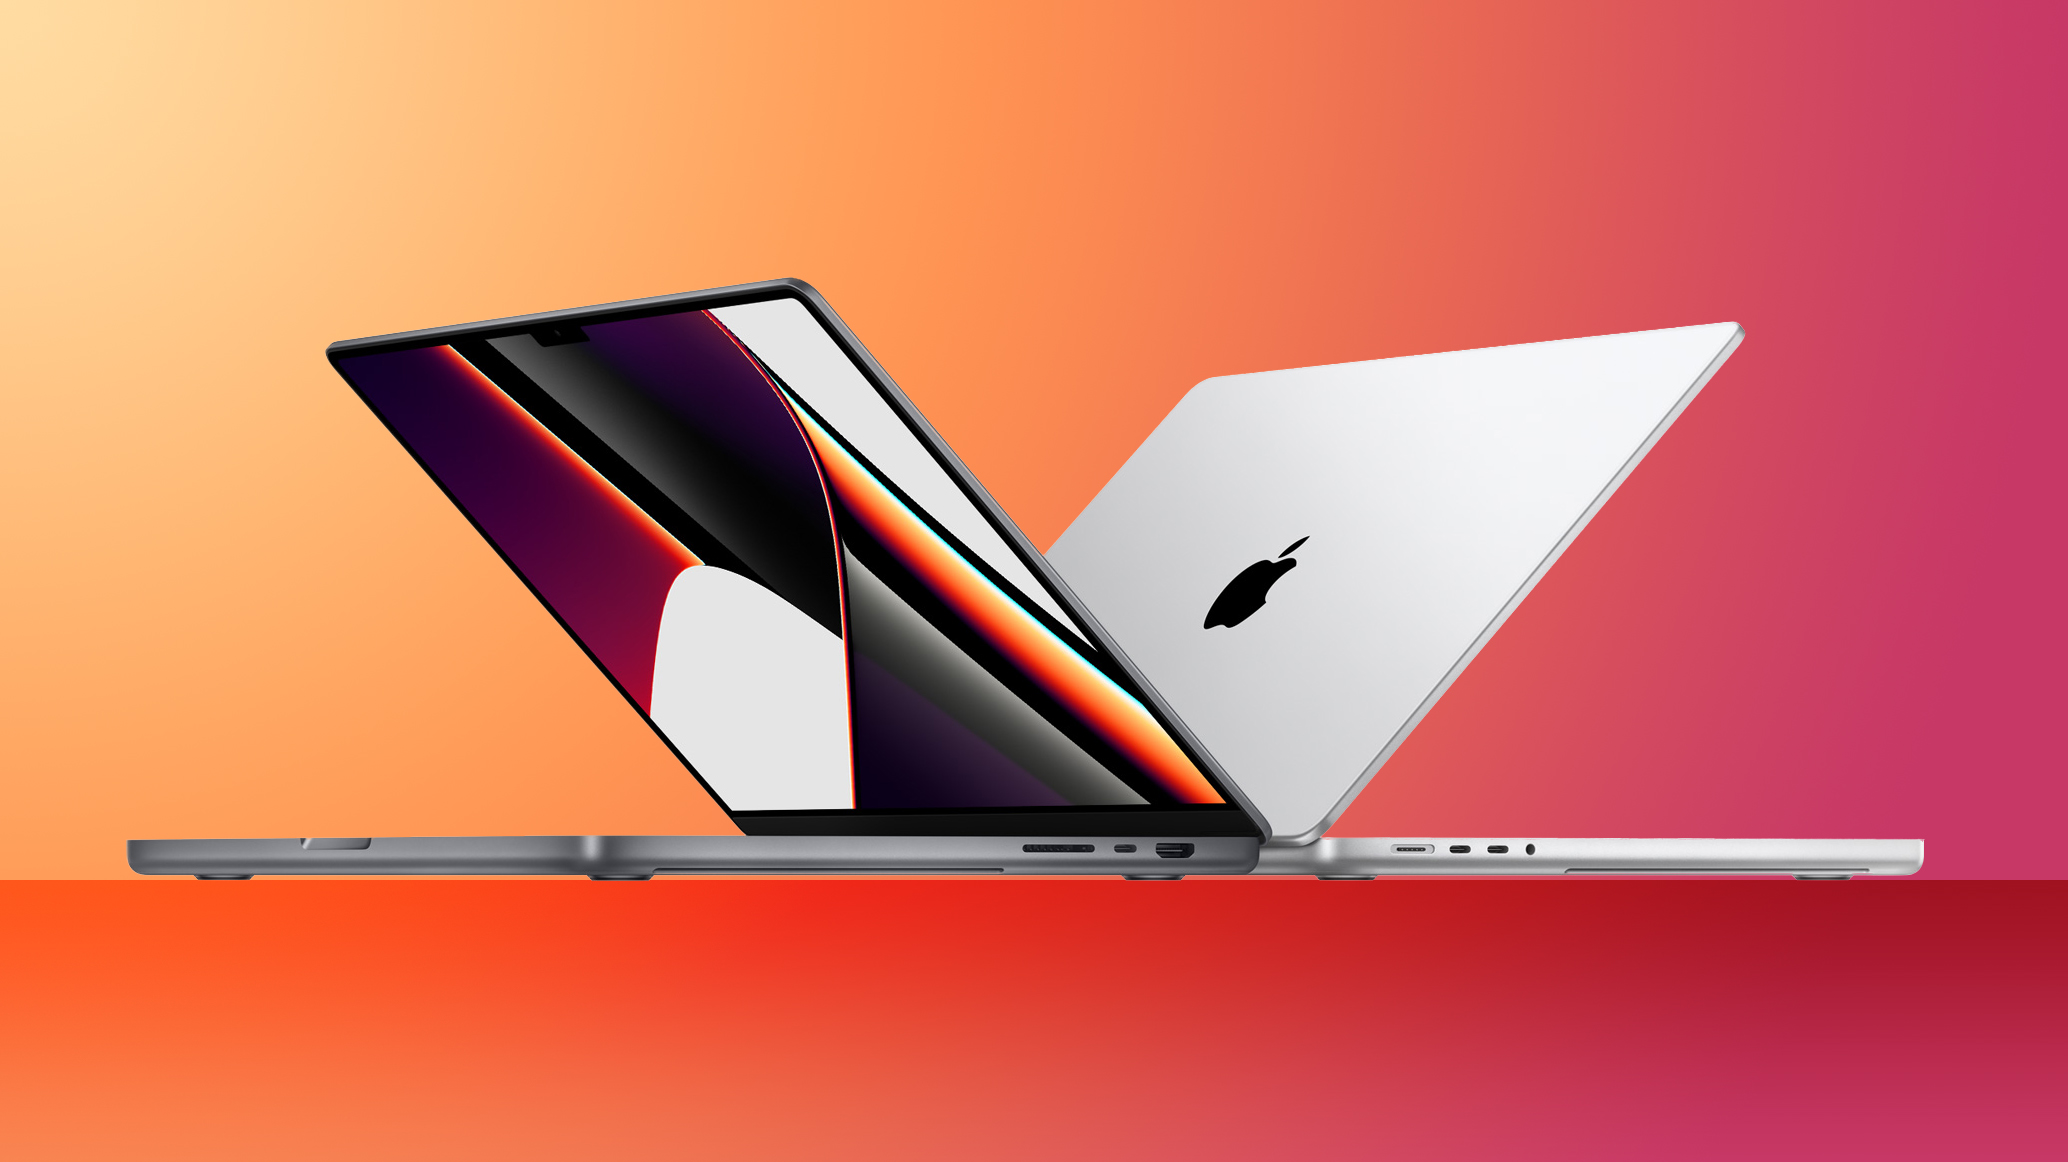 New MacBook Pro Models Max Out With 96GB of RAM, Up From 64GB All